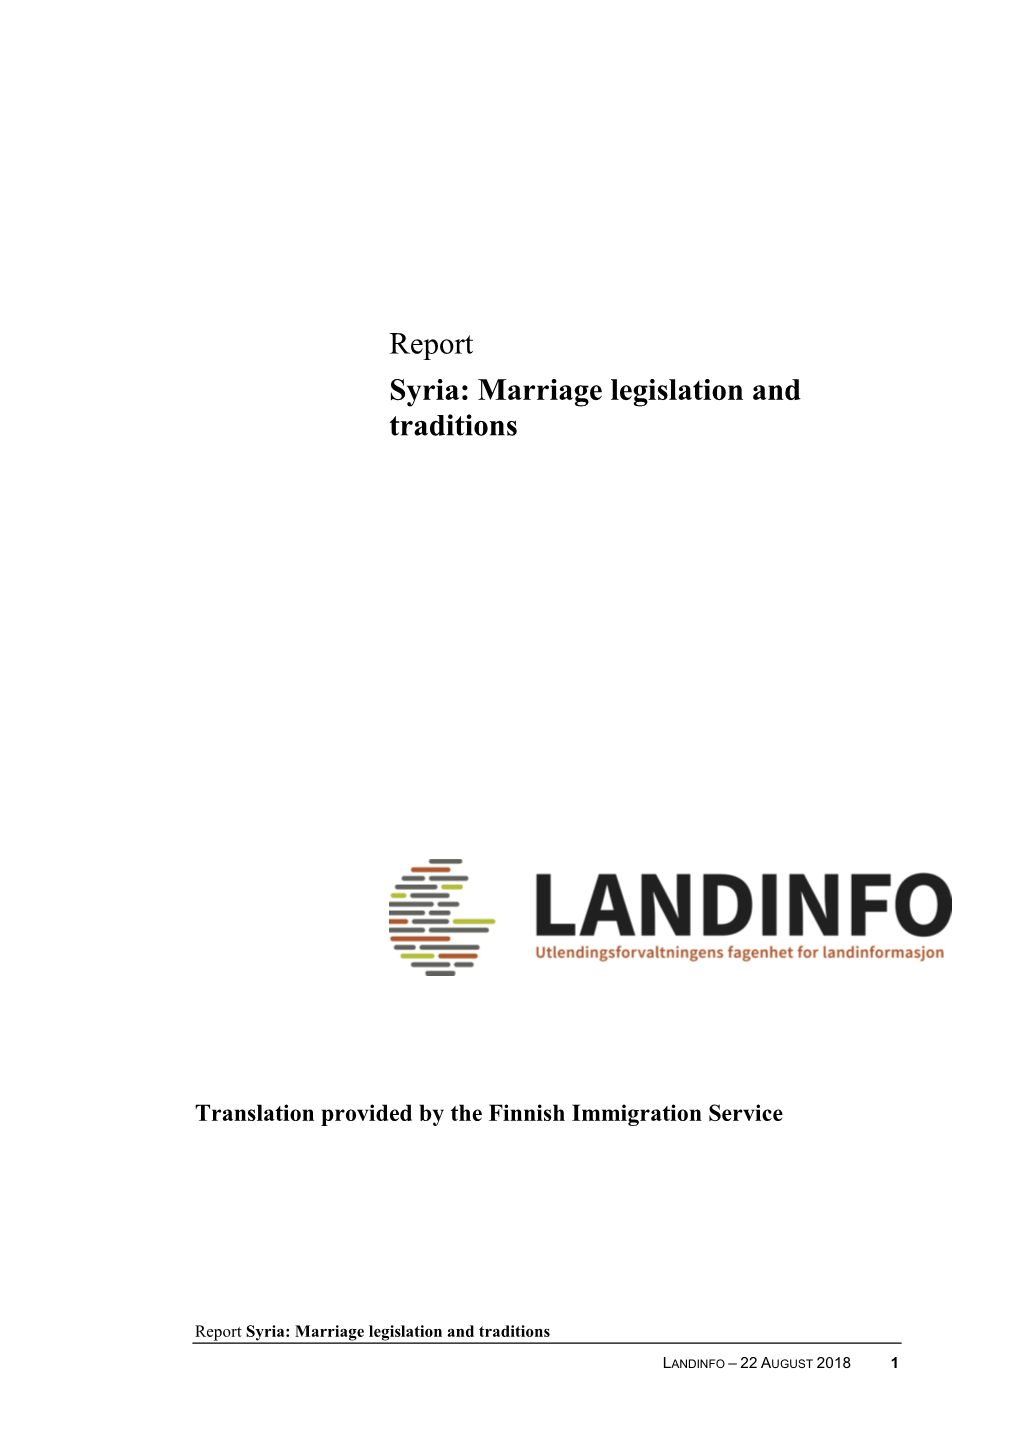 Syria Marriage Legislation and Traditions 22082018